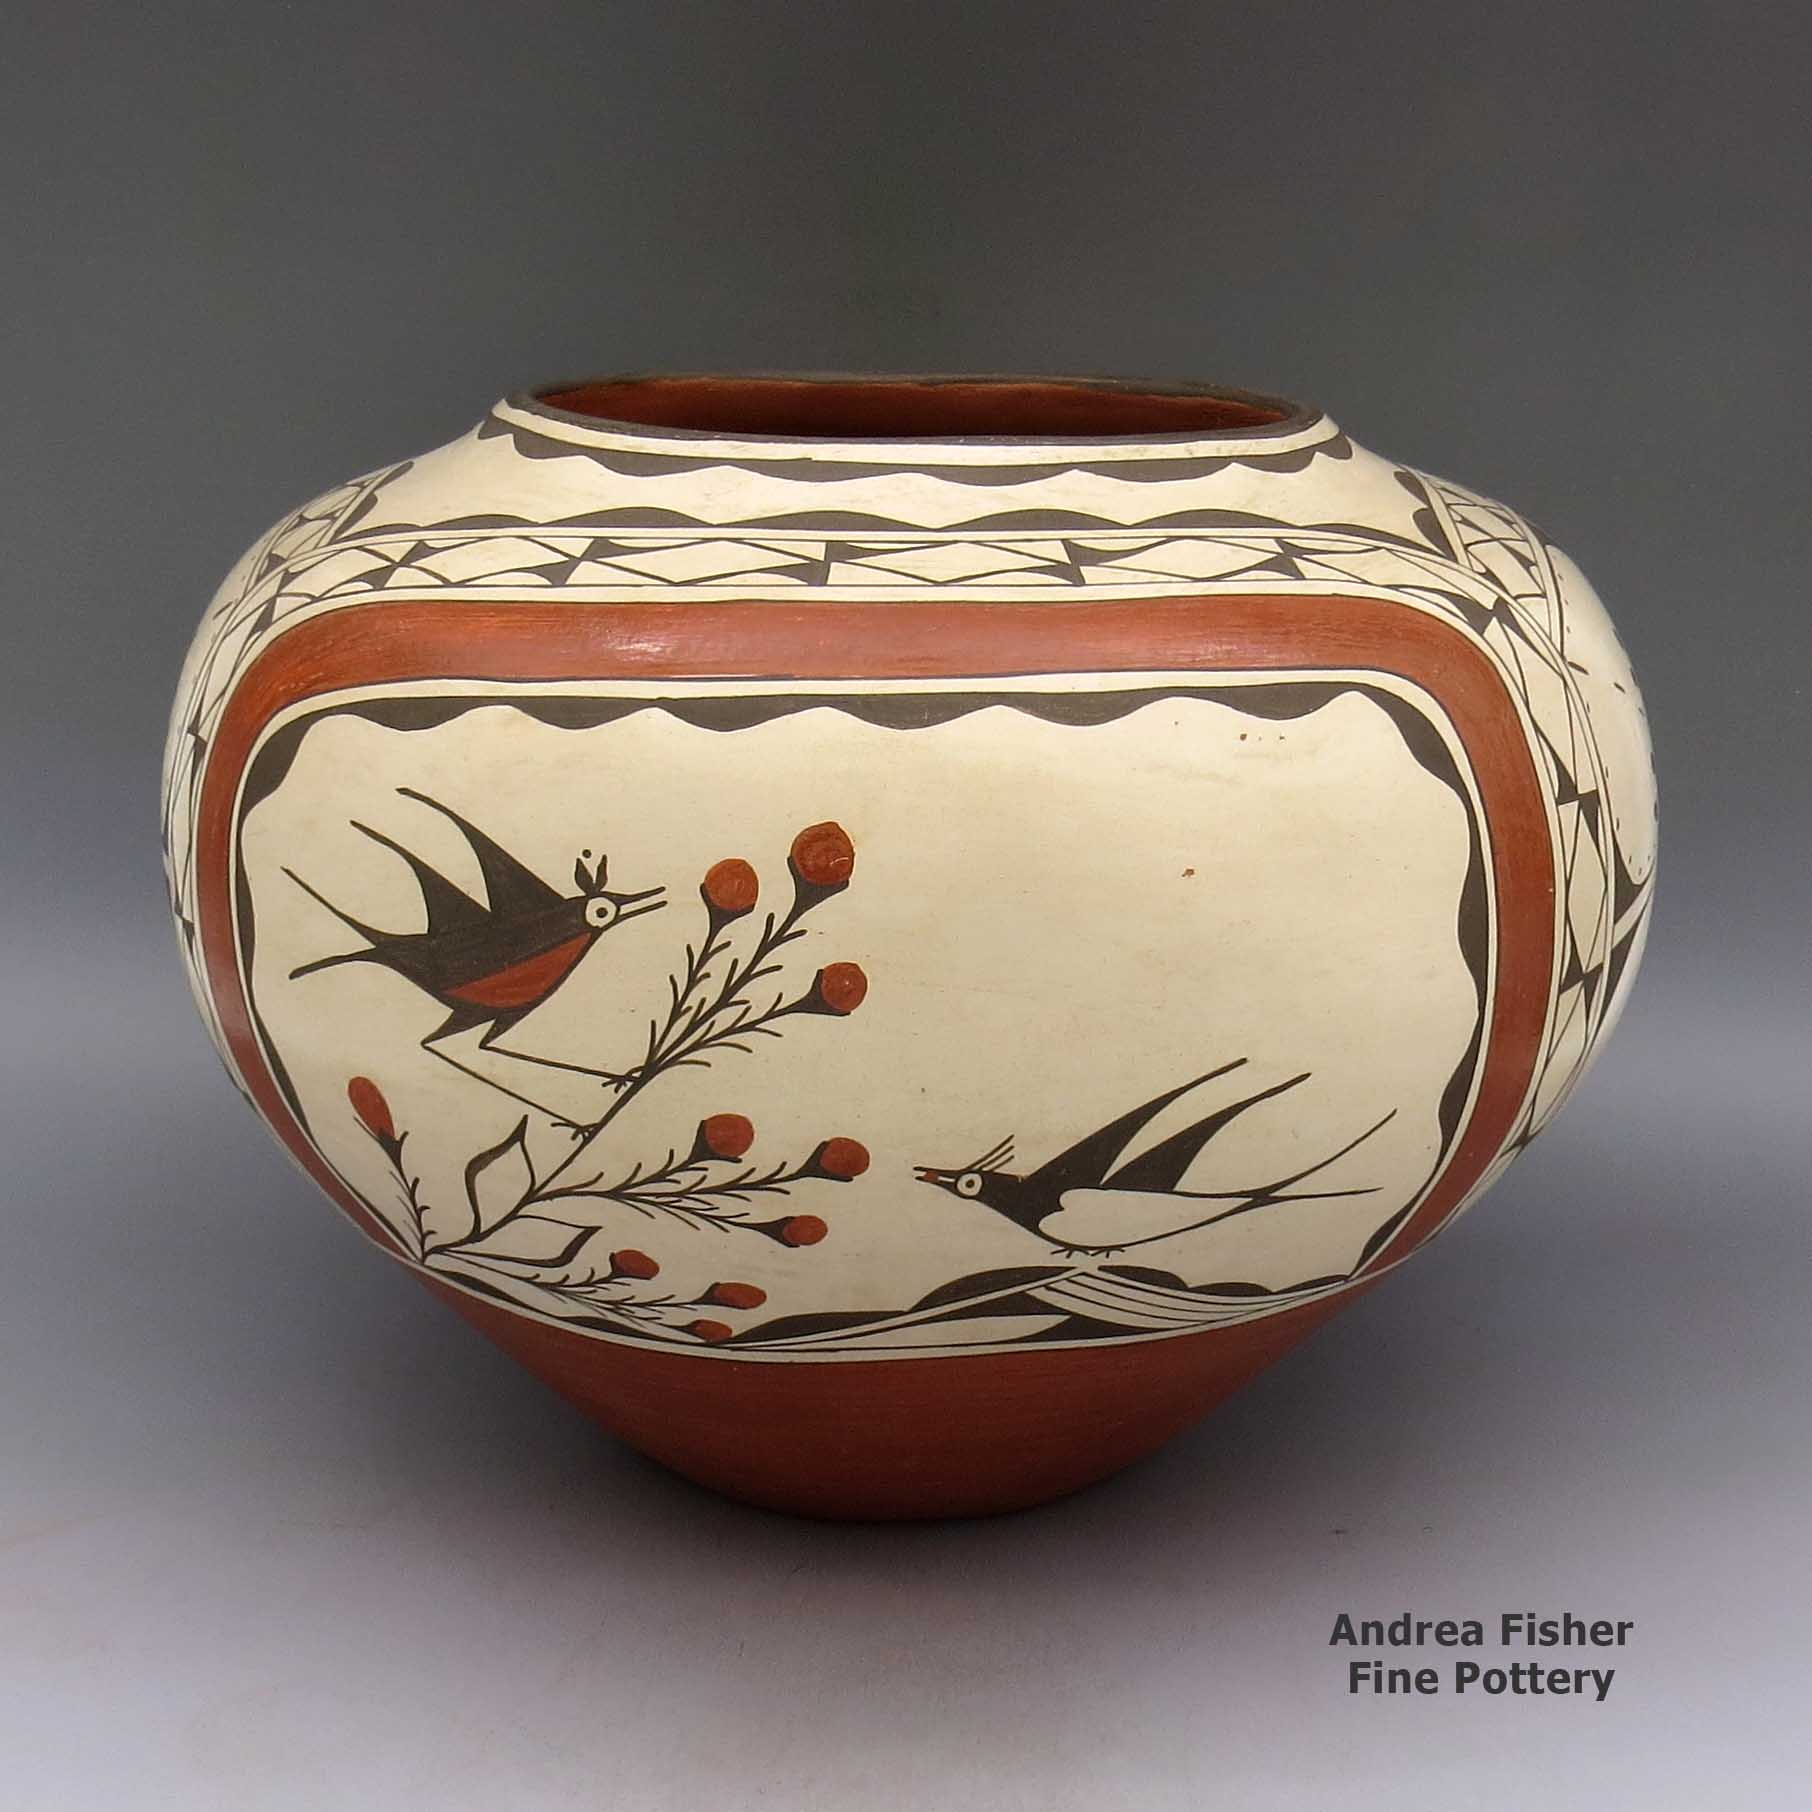 Polychrome jar with a bird, berry, branch, and geometric design made by Kathy Pino of Zia